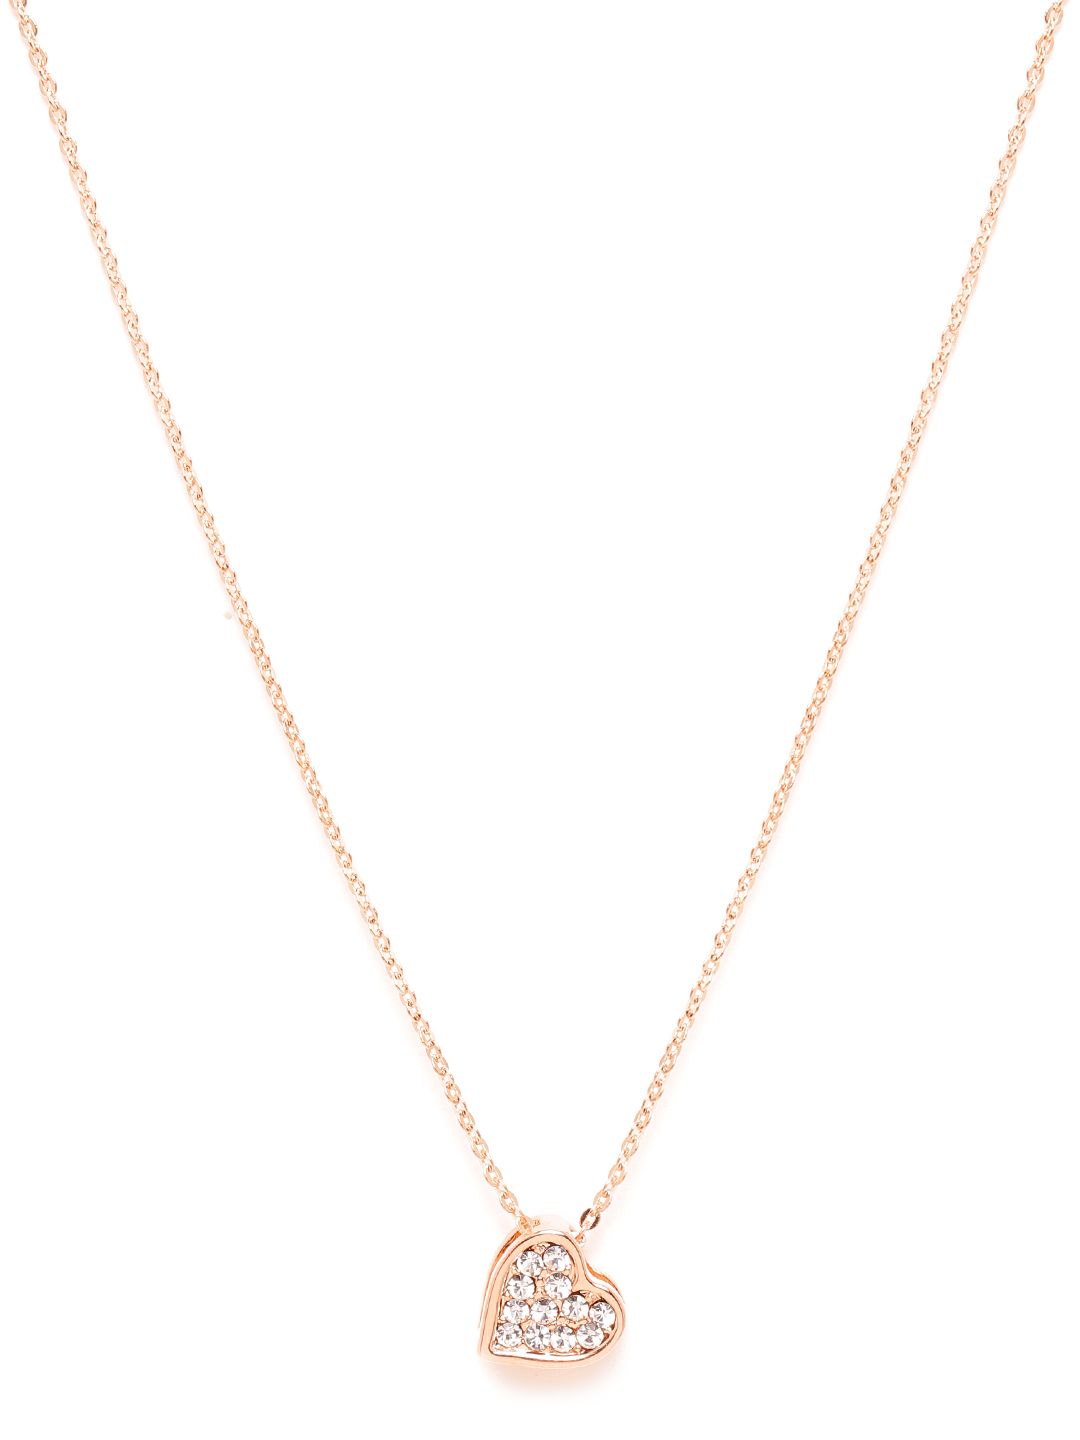 Carlton London Rose Gold-Plated CZ Studded Minimal Heart Shaped Necklace Price in India